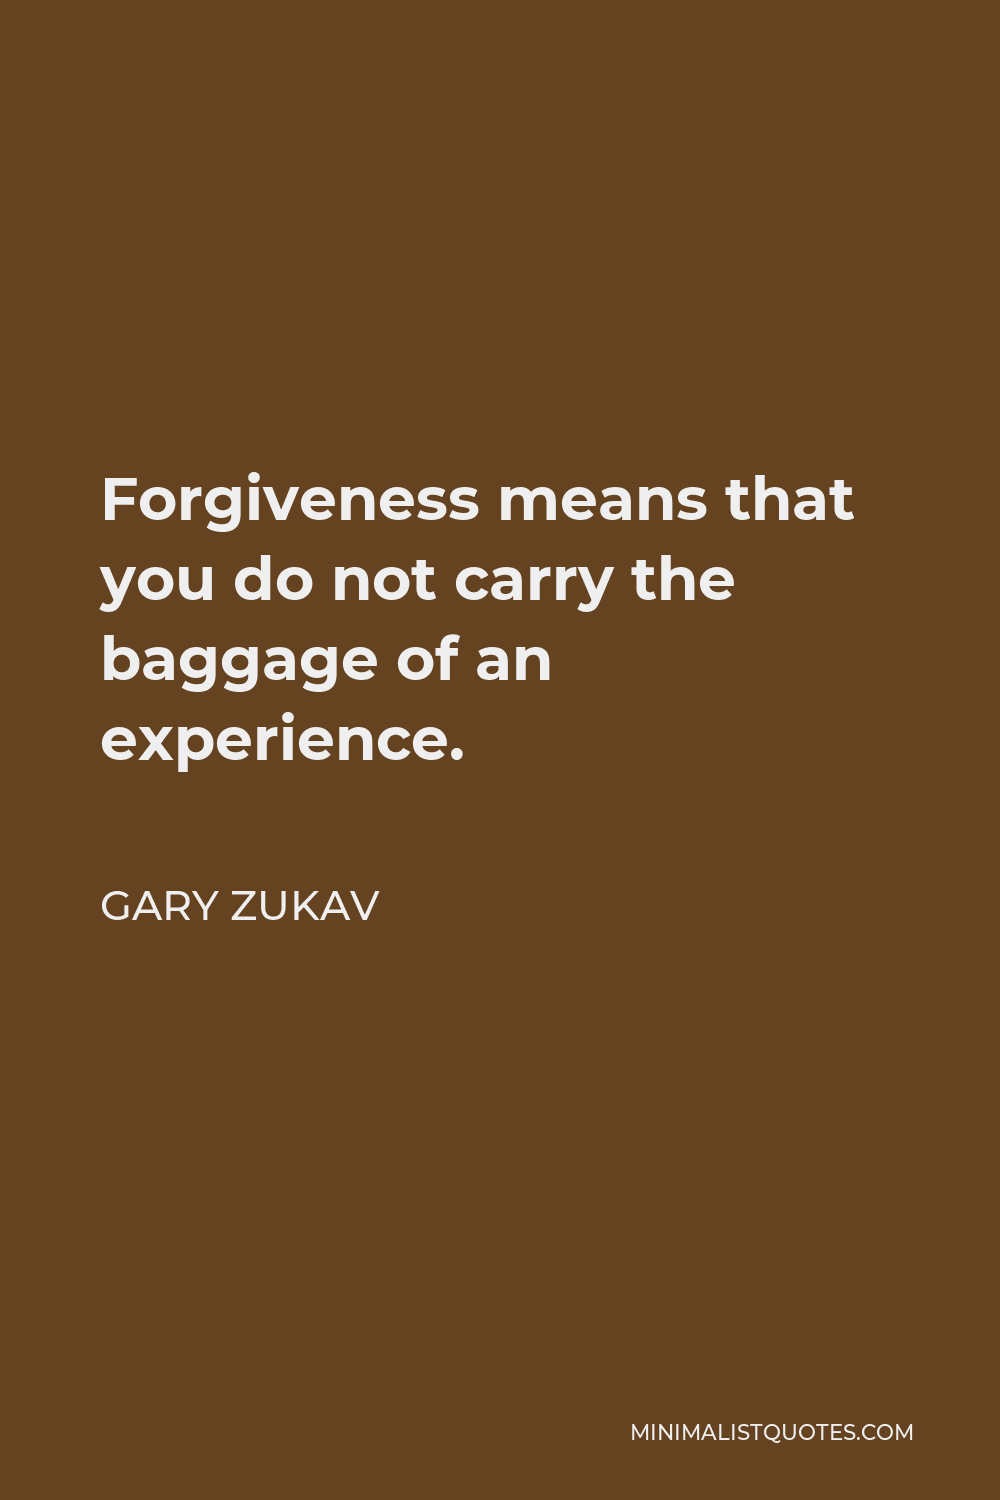 Gary Zukav Quote - Forgiveness means that you do not carry the baggage of an experience.